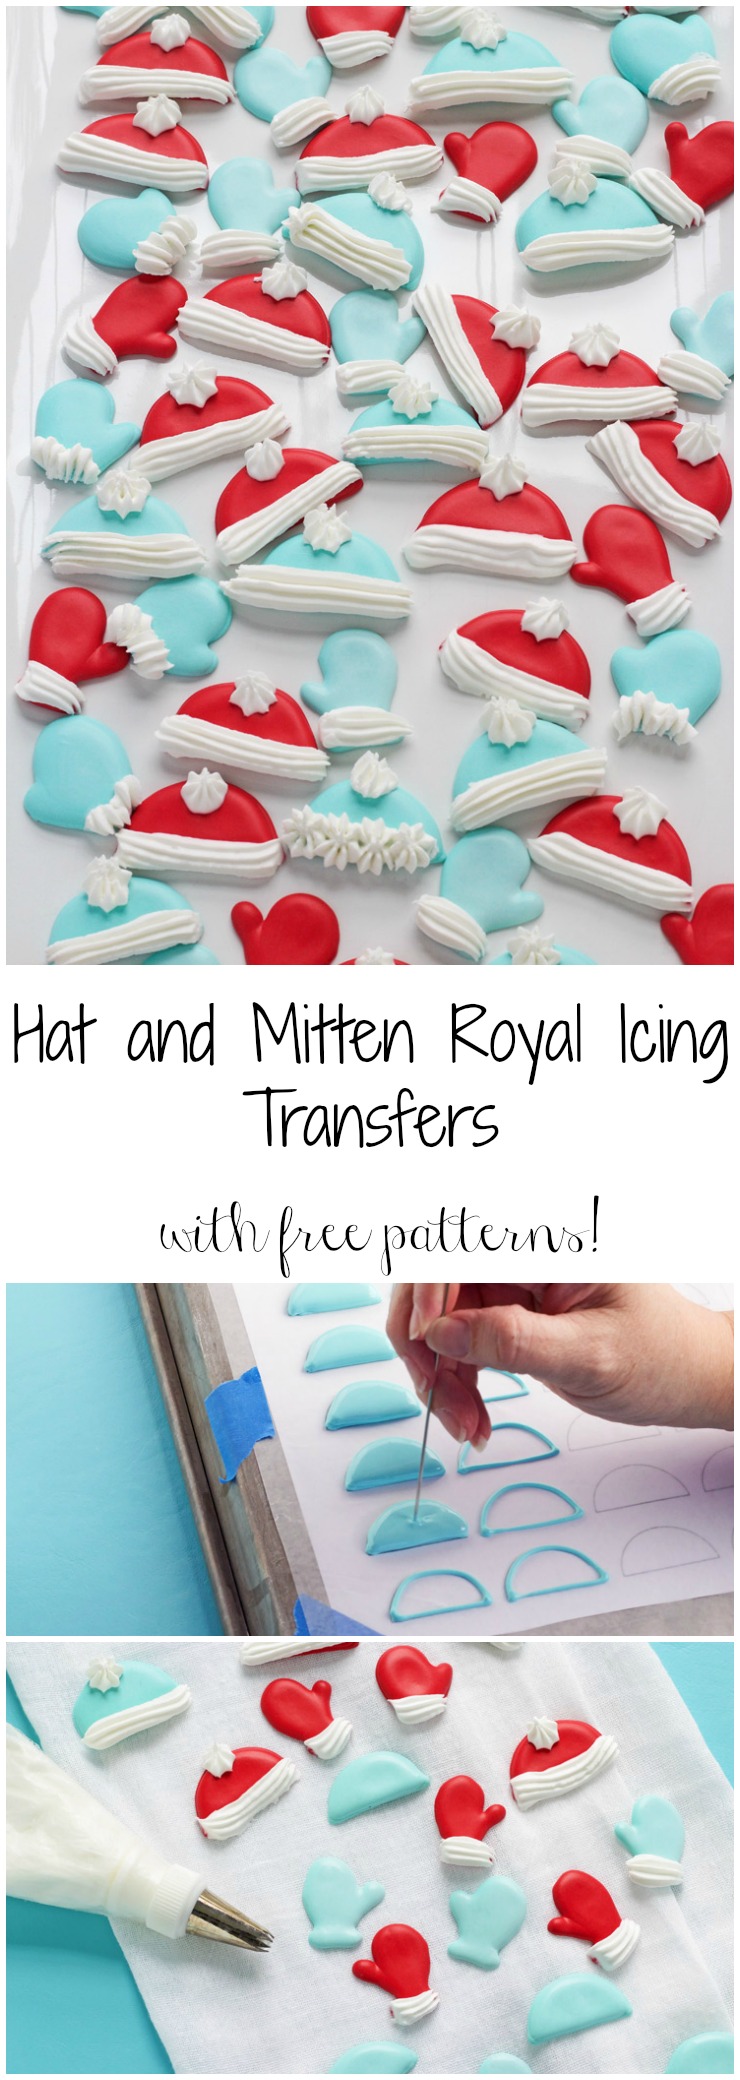 Free Printable Patterns for Hat and Mitten Royal Icing Transfers | The Bearfoot Baker